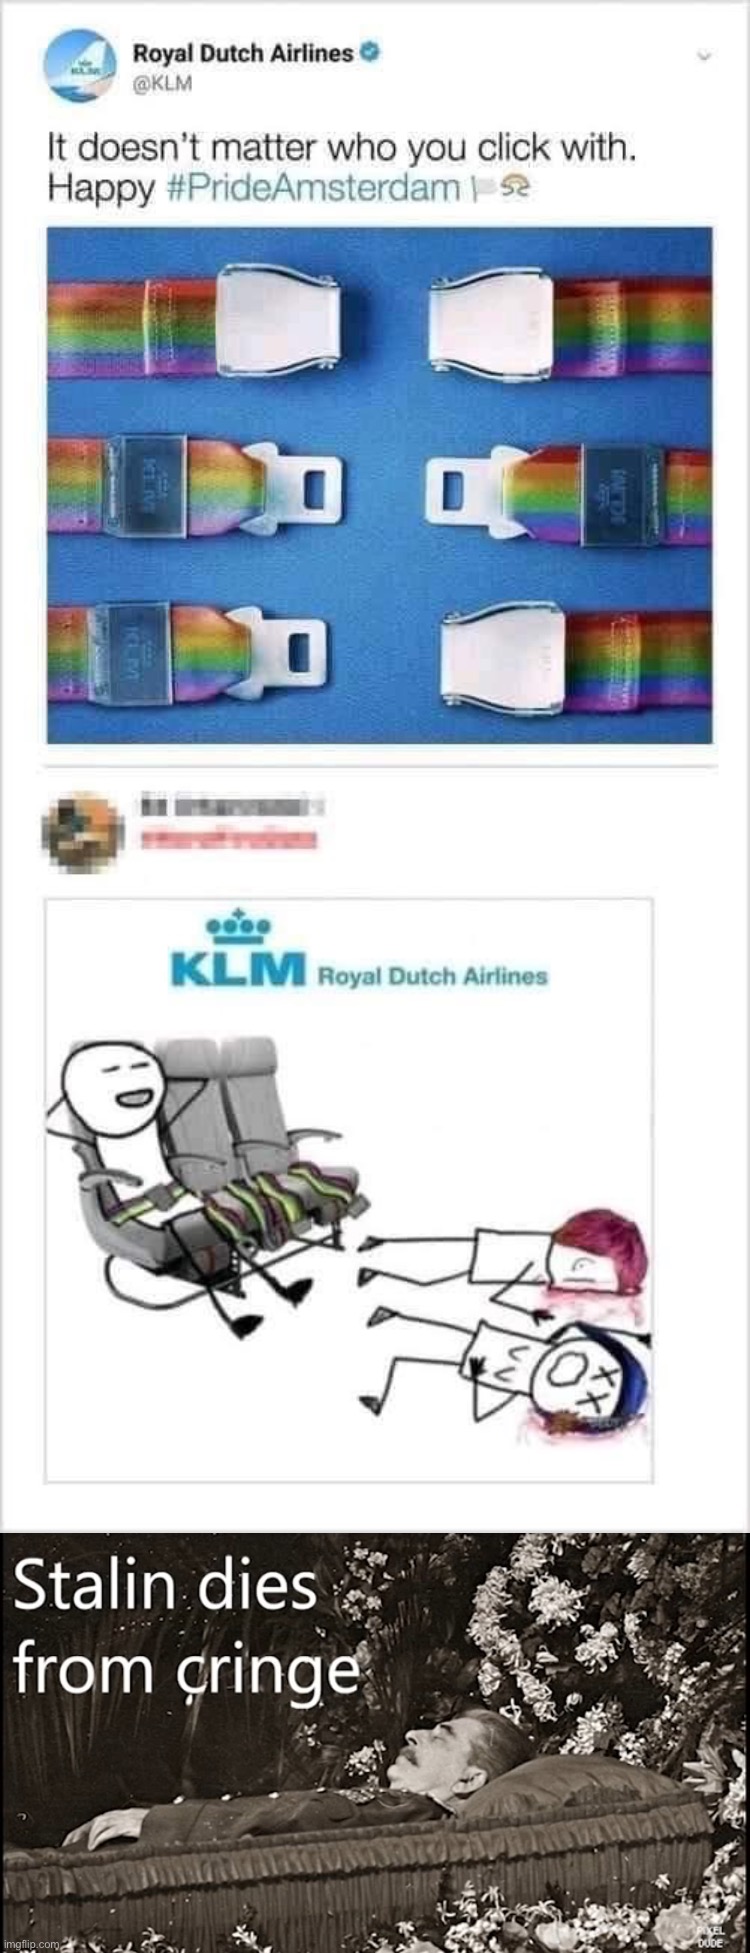 Homophobiaphobia | image tagged in royal dutch airlines cringe pride month ad,stalin dies from cringe,homophobiaphobia,oof,cringe,cringe worthy | made w/ Imgflip meme maker